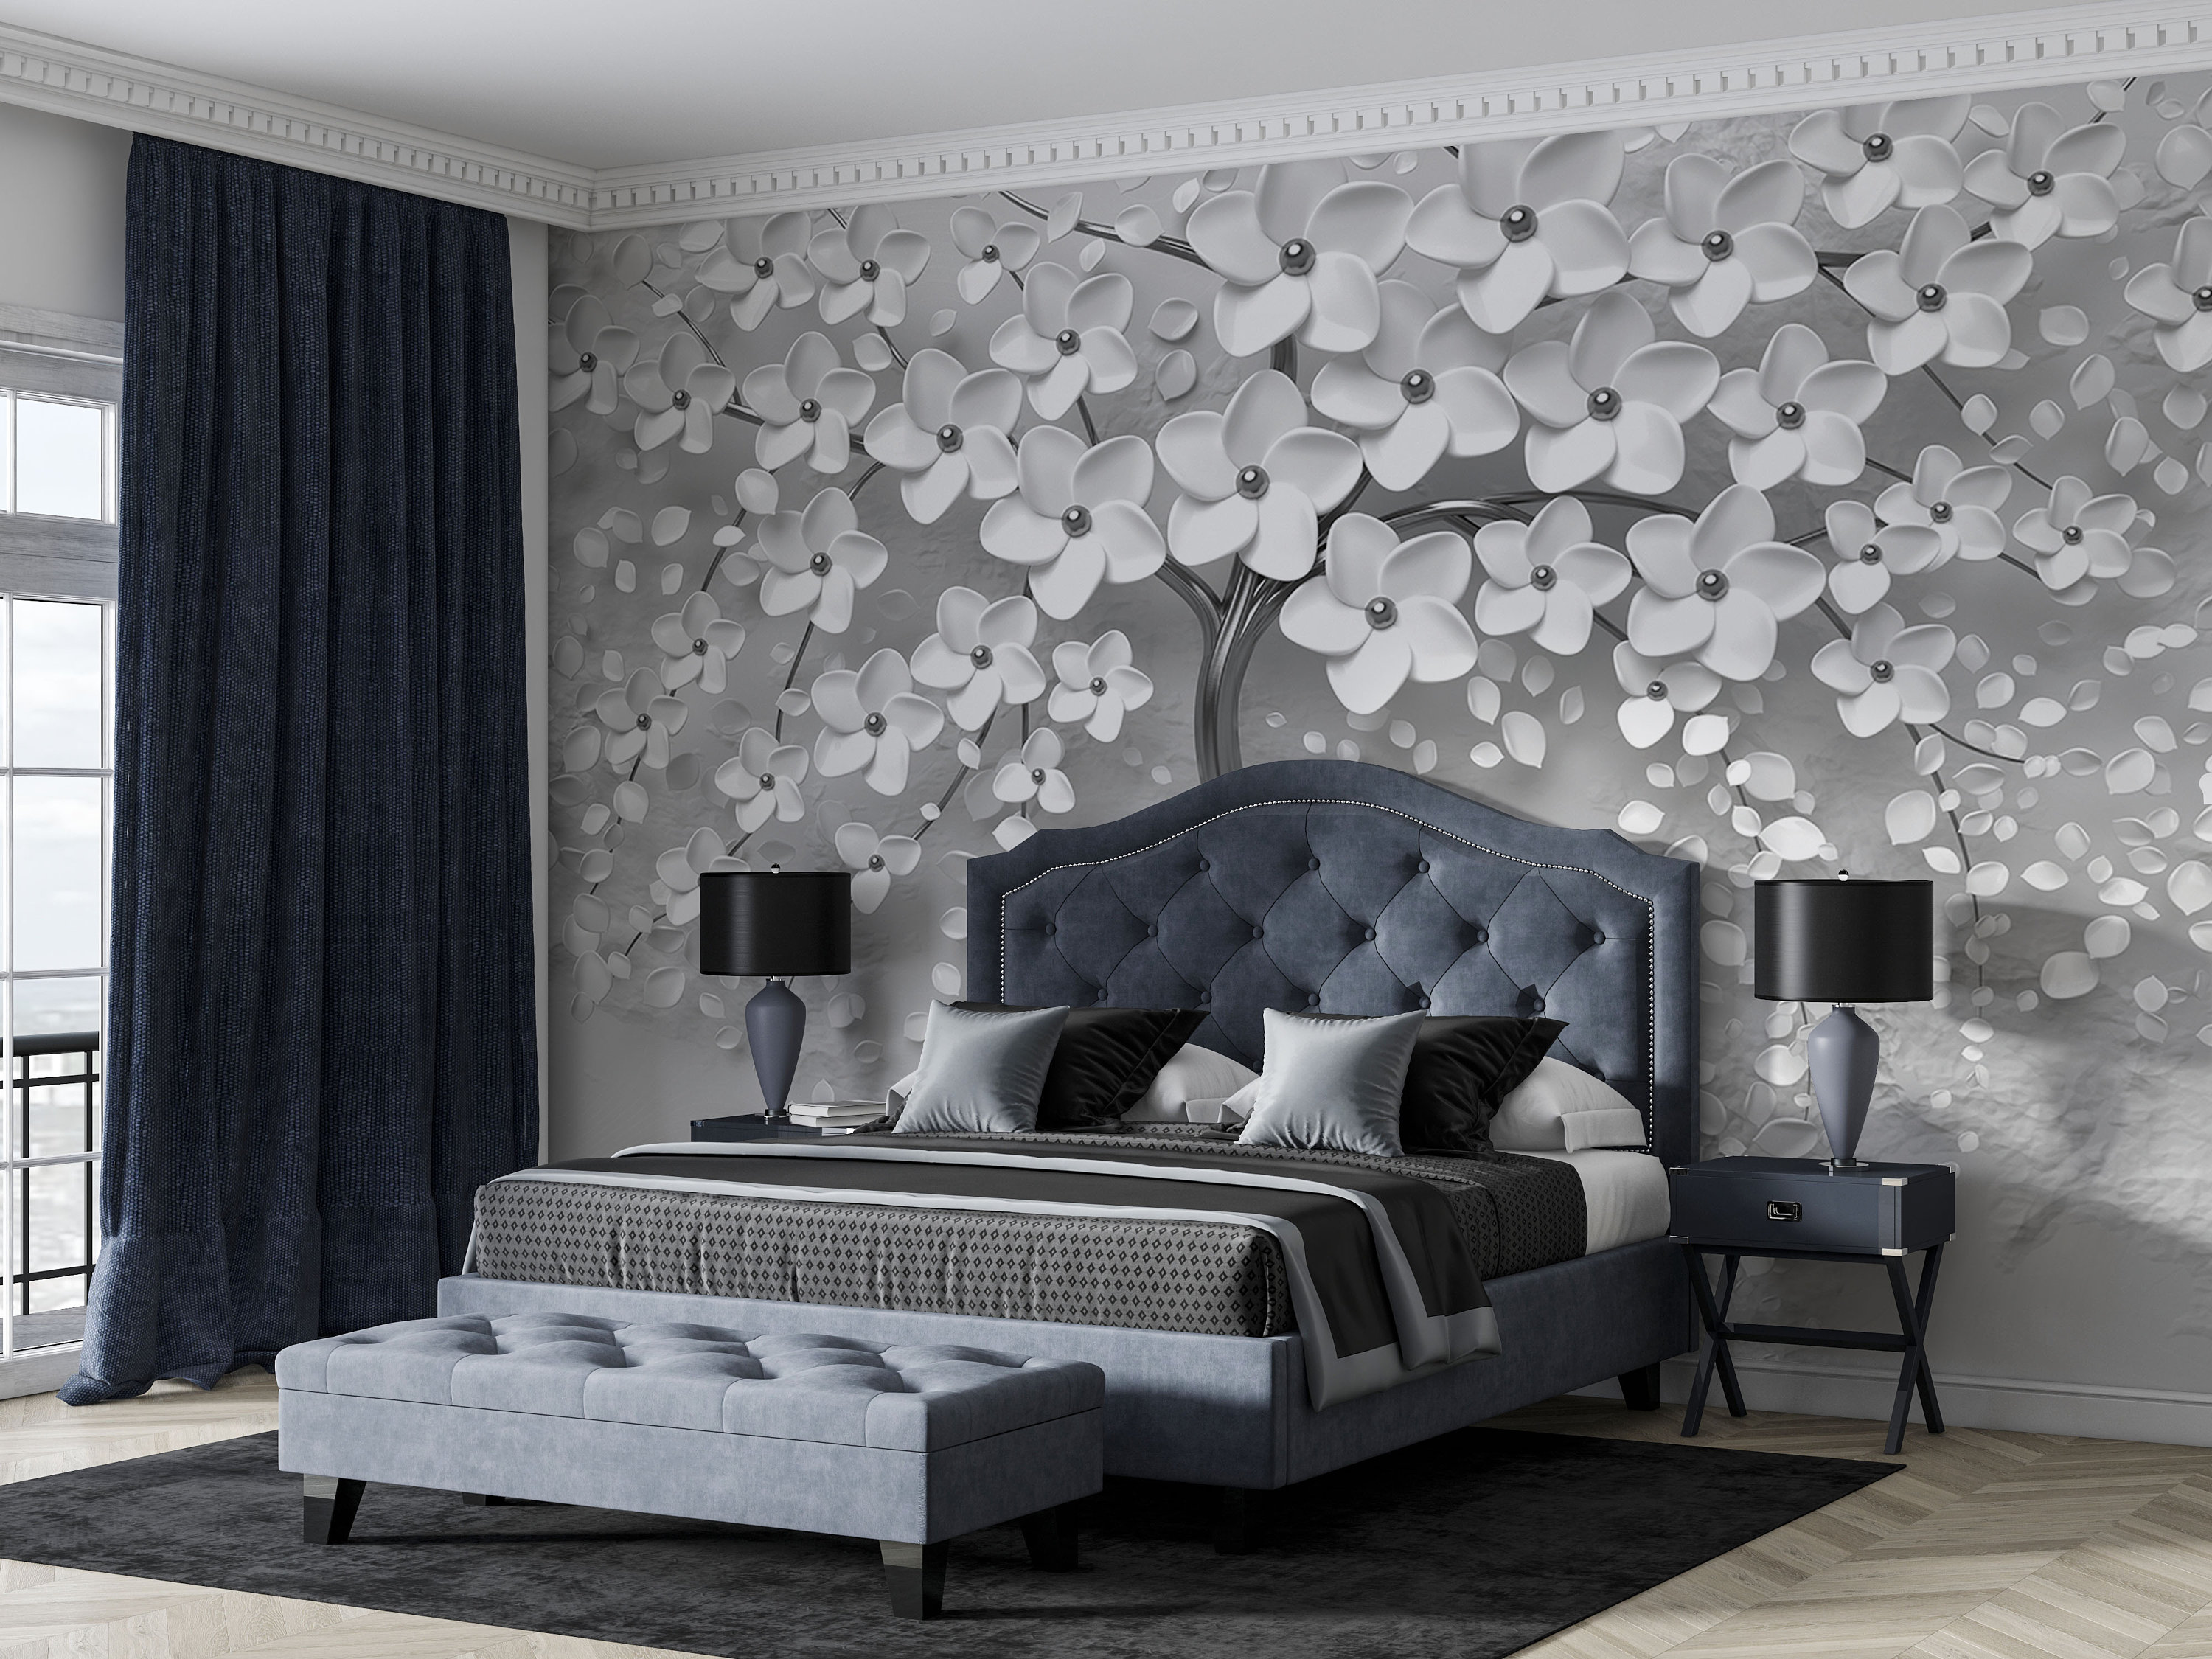 Create a Unique Space with These Bedroom Wallpaper Ideas | Feathr™